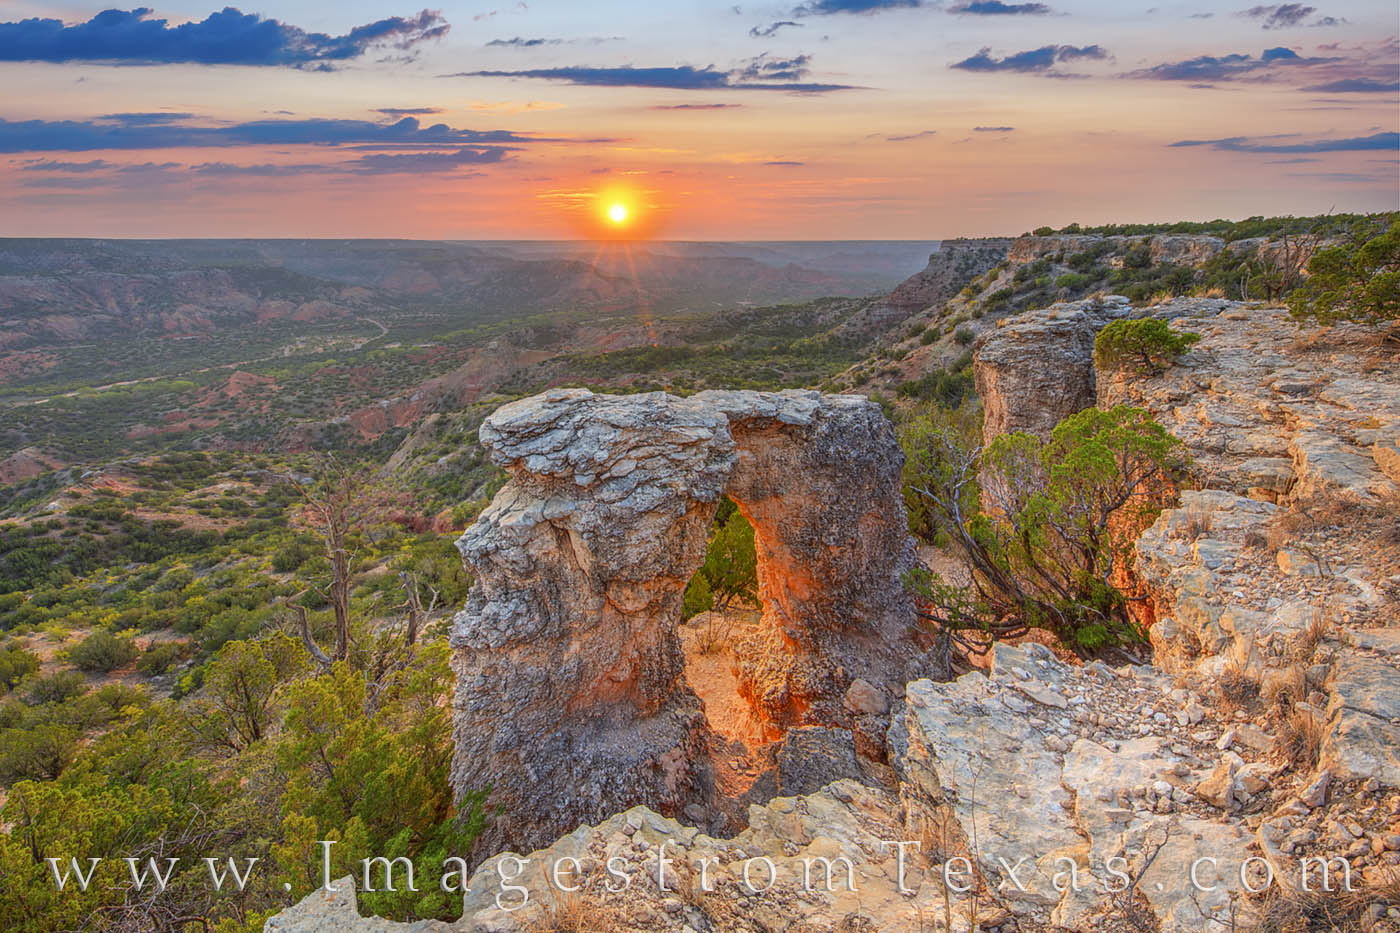 palo duro canyon, arch, sunset, hiking, eastern rim, scrambling, alter, state park, solitude